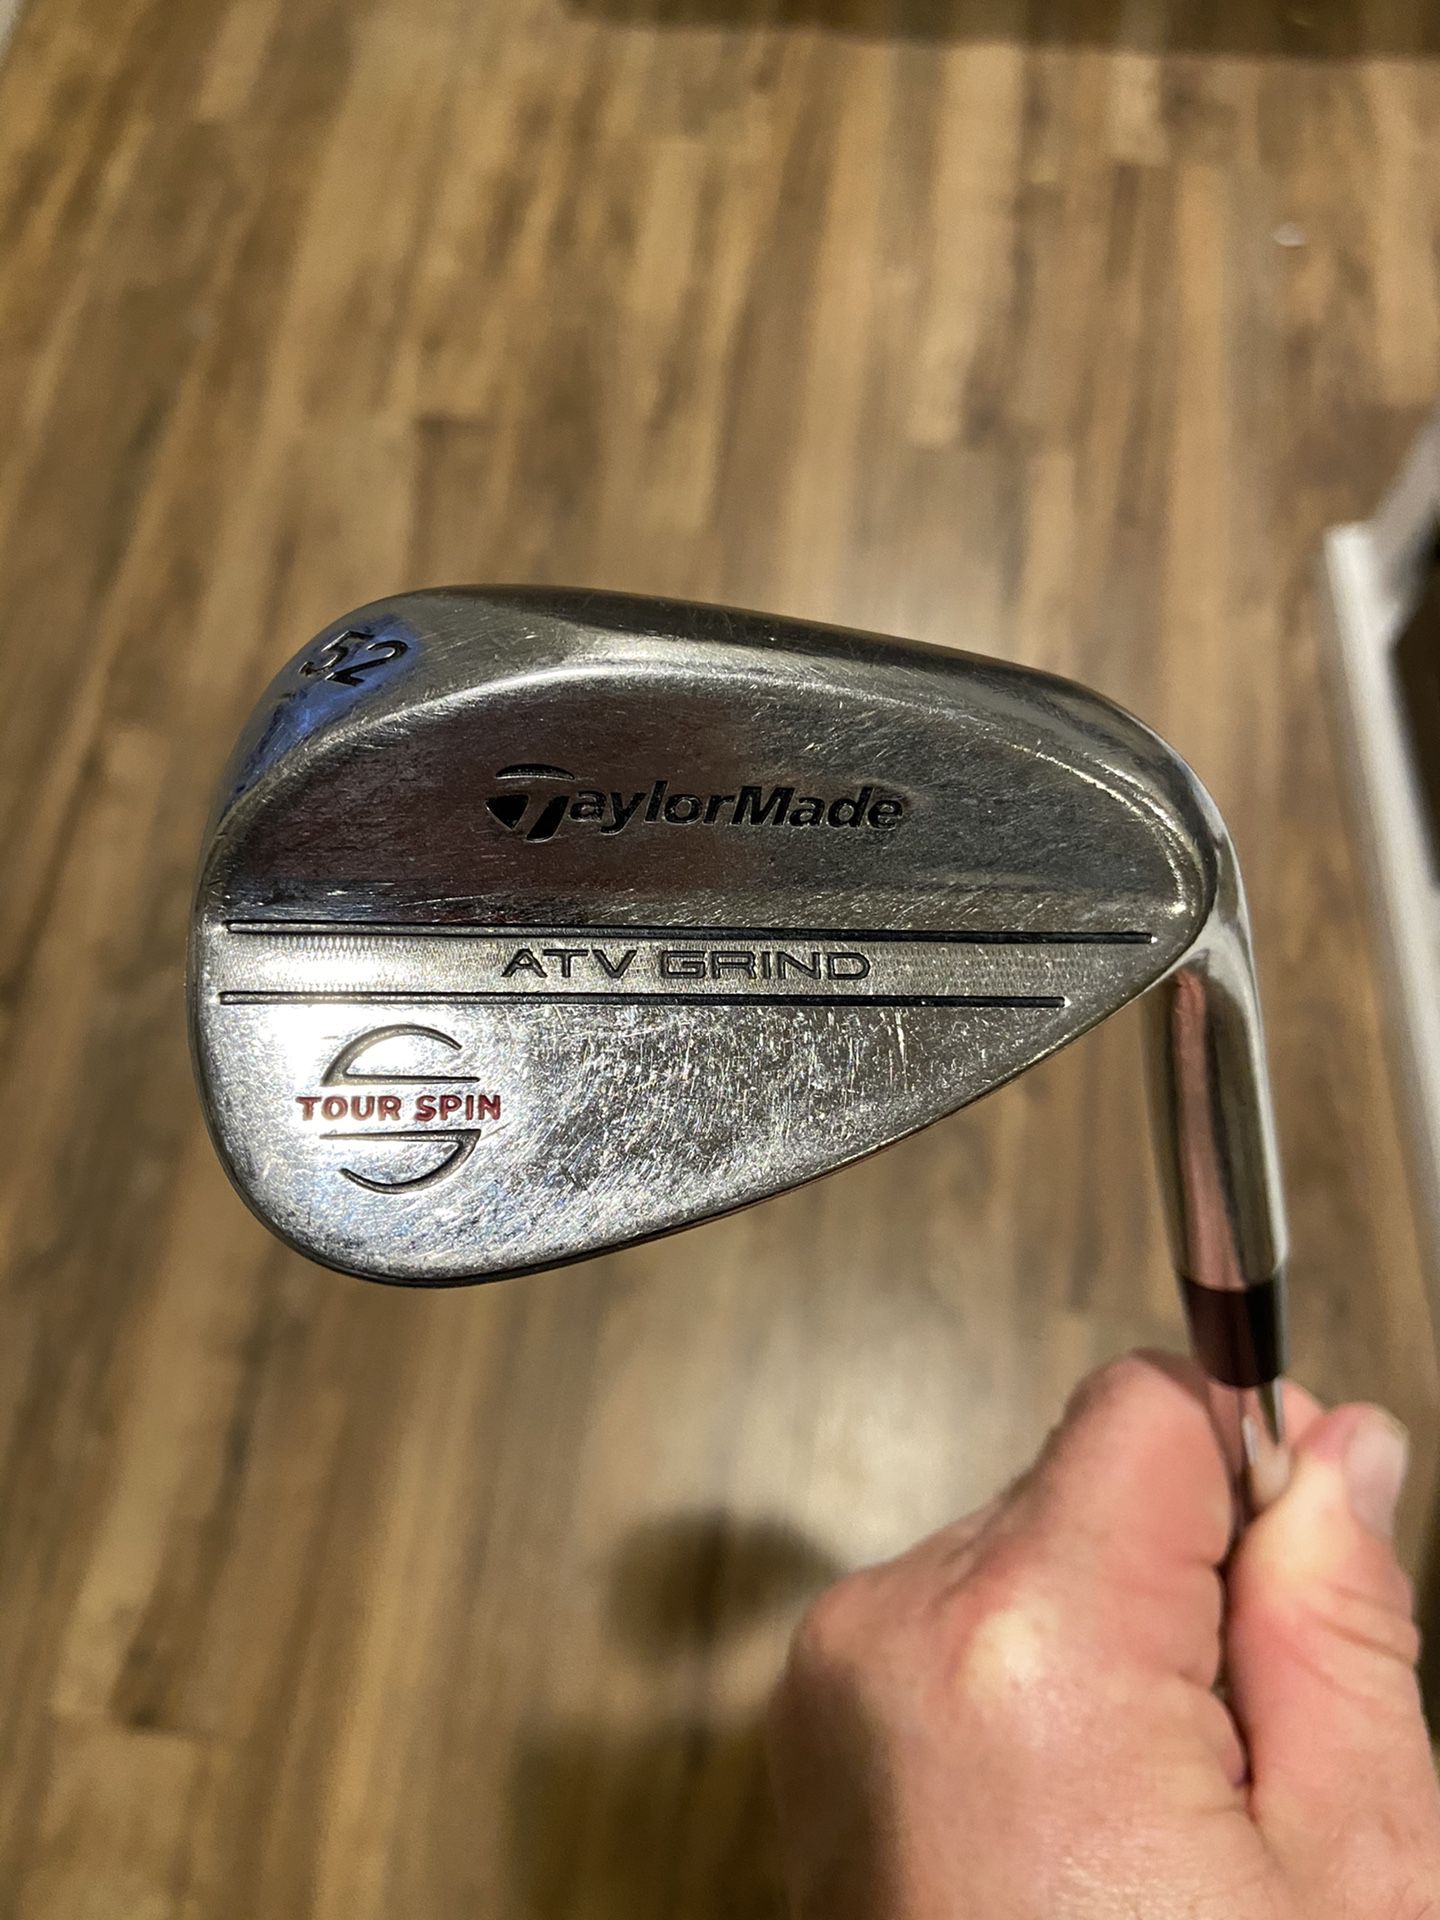 TaylorMade 52 ATV GRIND TOUR SPIN Wedge